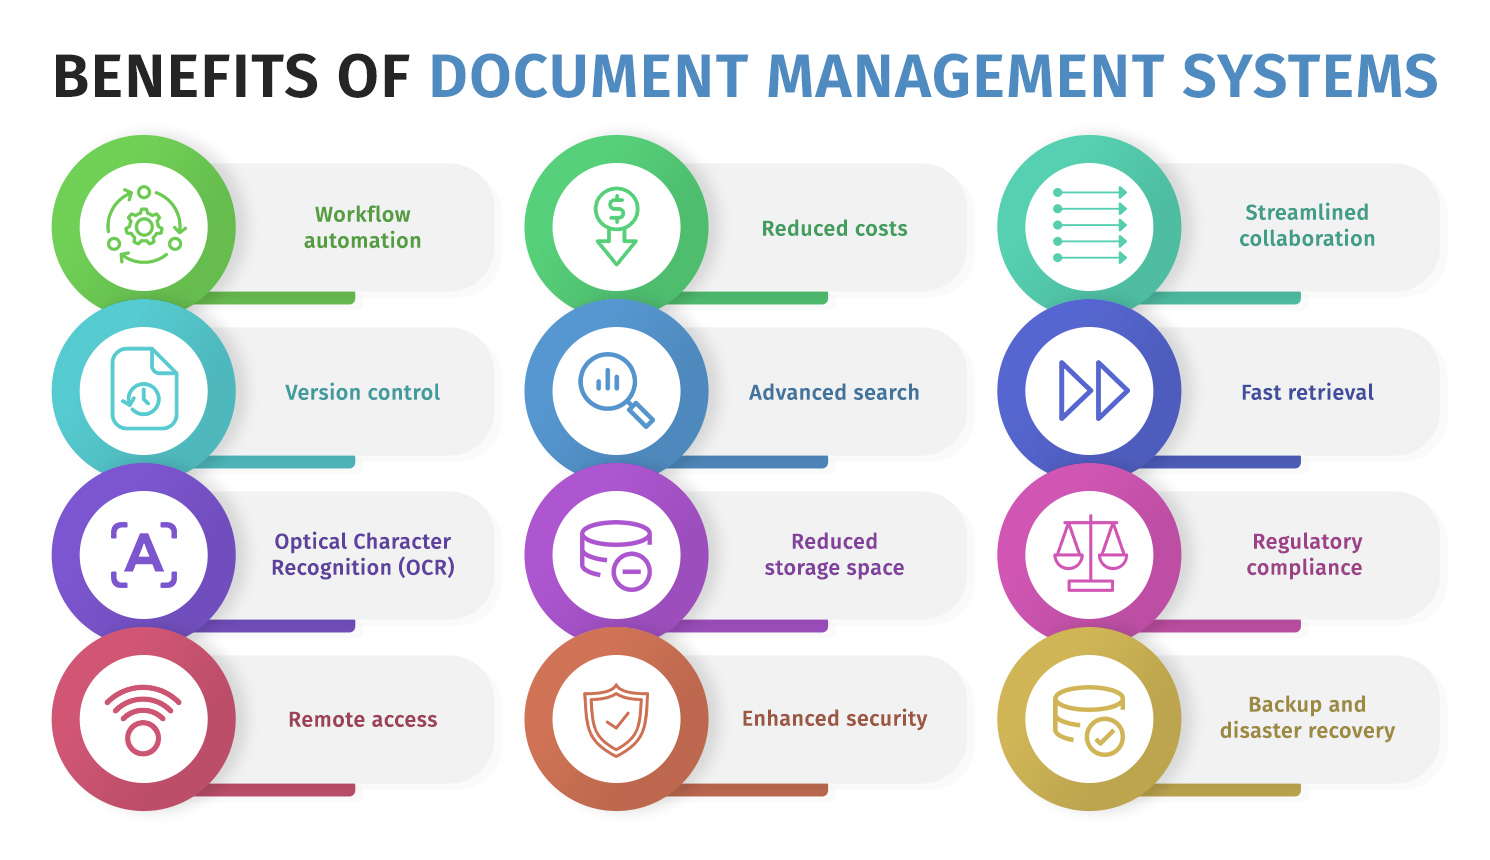 Benefits of Document Management Systems